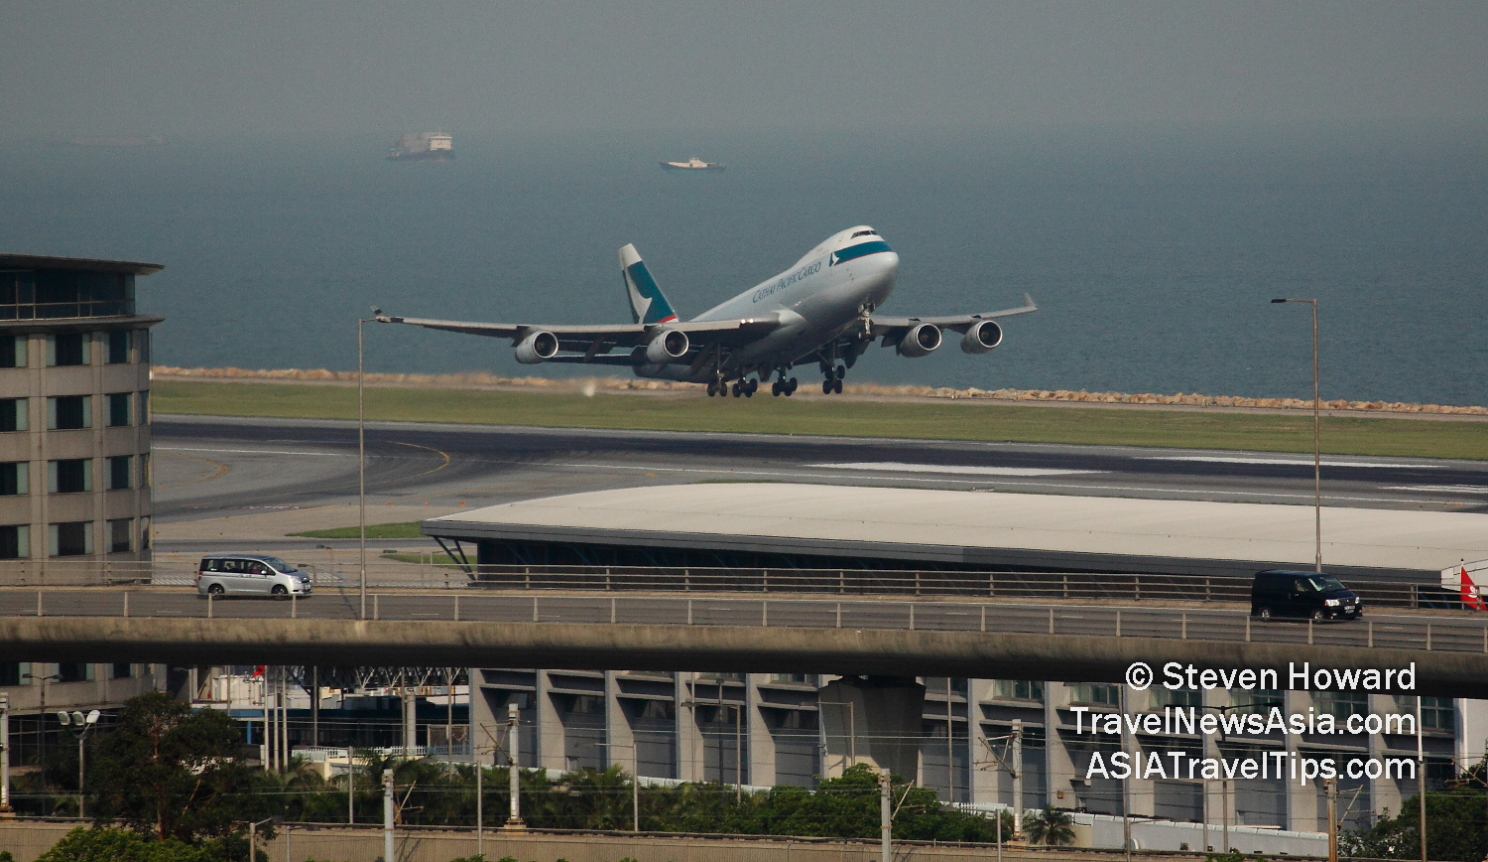 Cathay Cargo B747F taking off from HKIA. Picture by Steven Howard of TravelNewsAsia.com Click to enlarge.